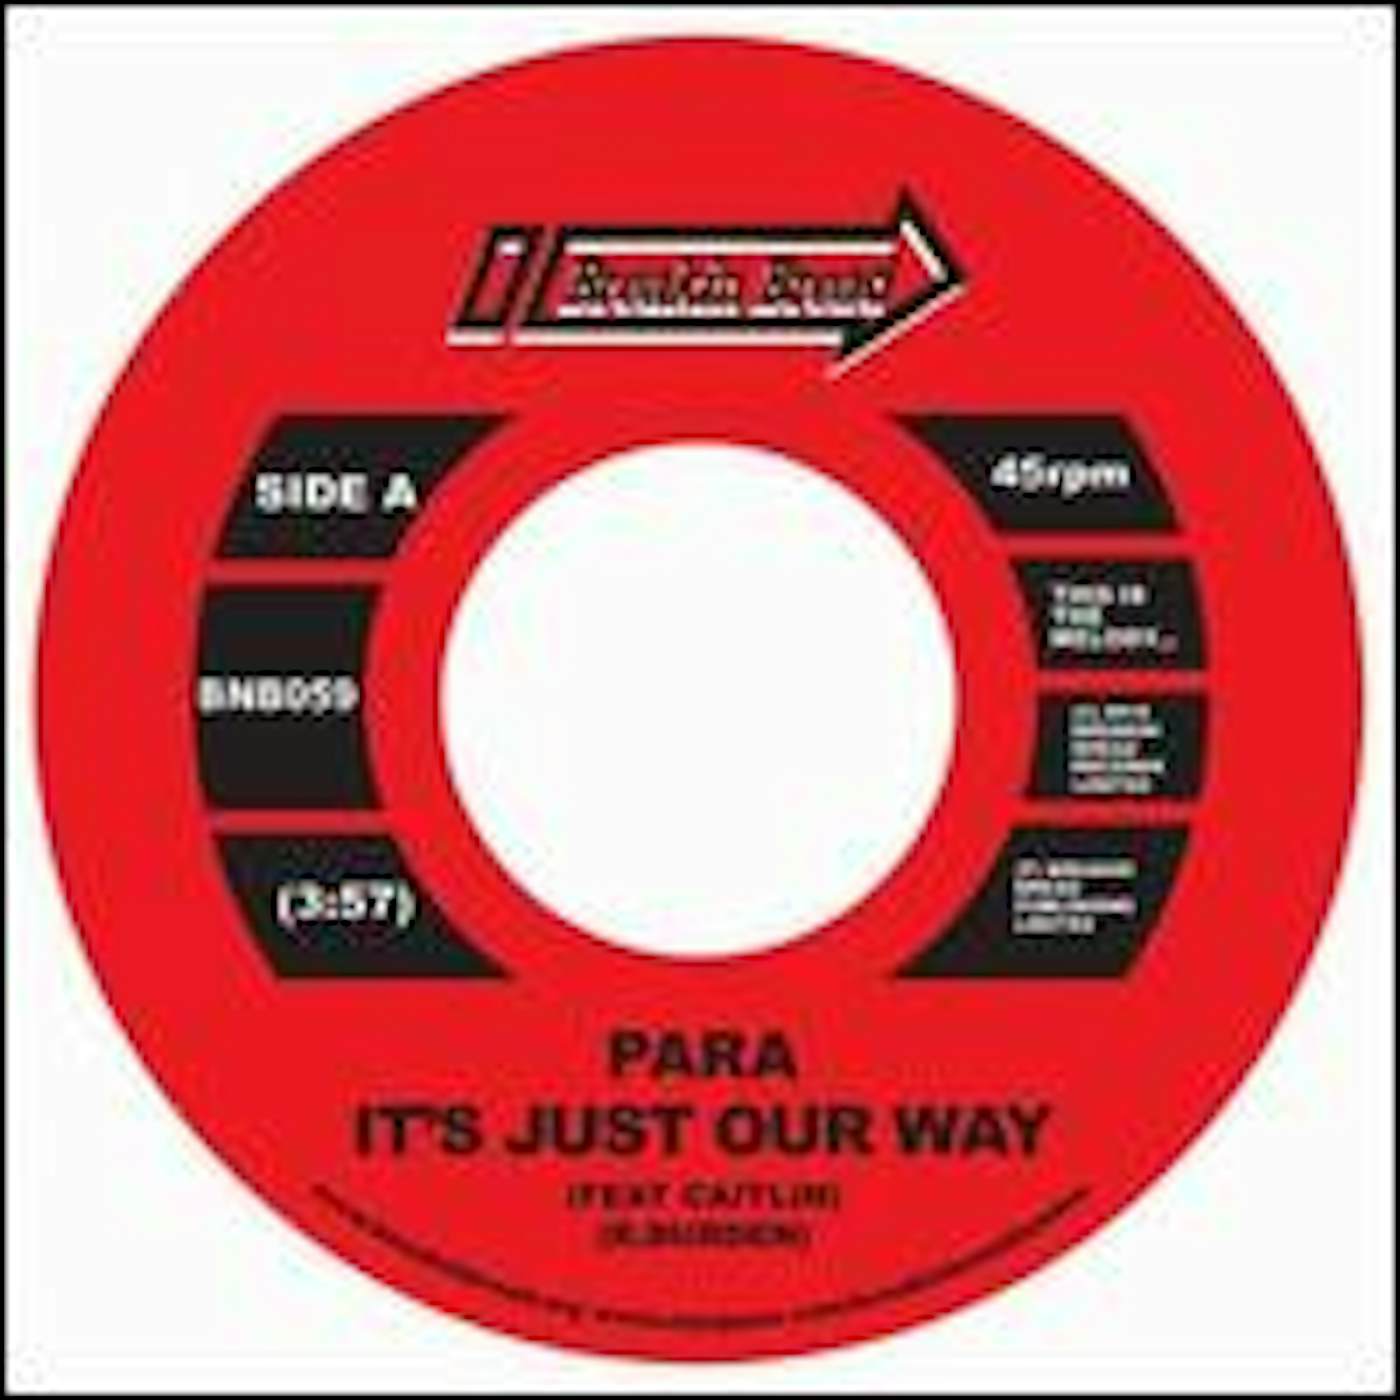 IT'S JUST OUR WAY/PARADEE Vinyl Record - UK Release